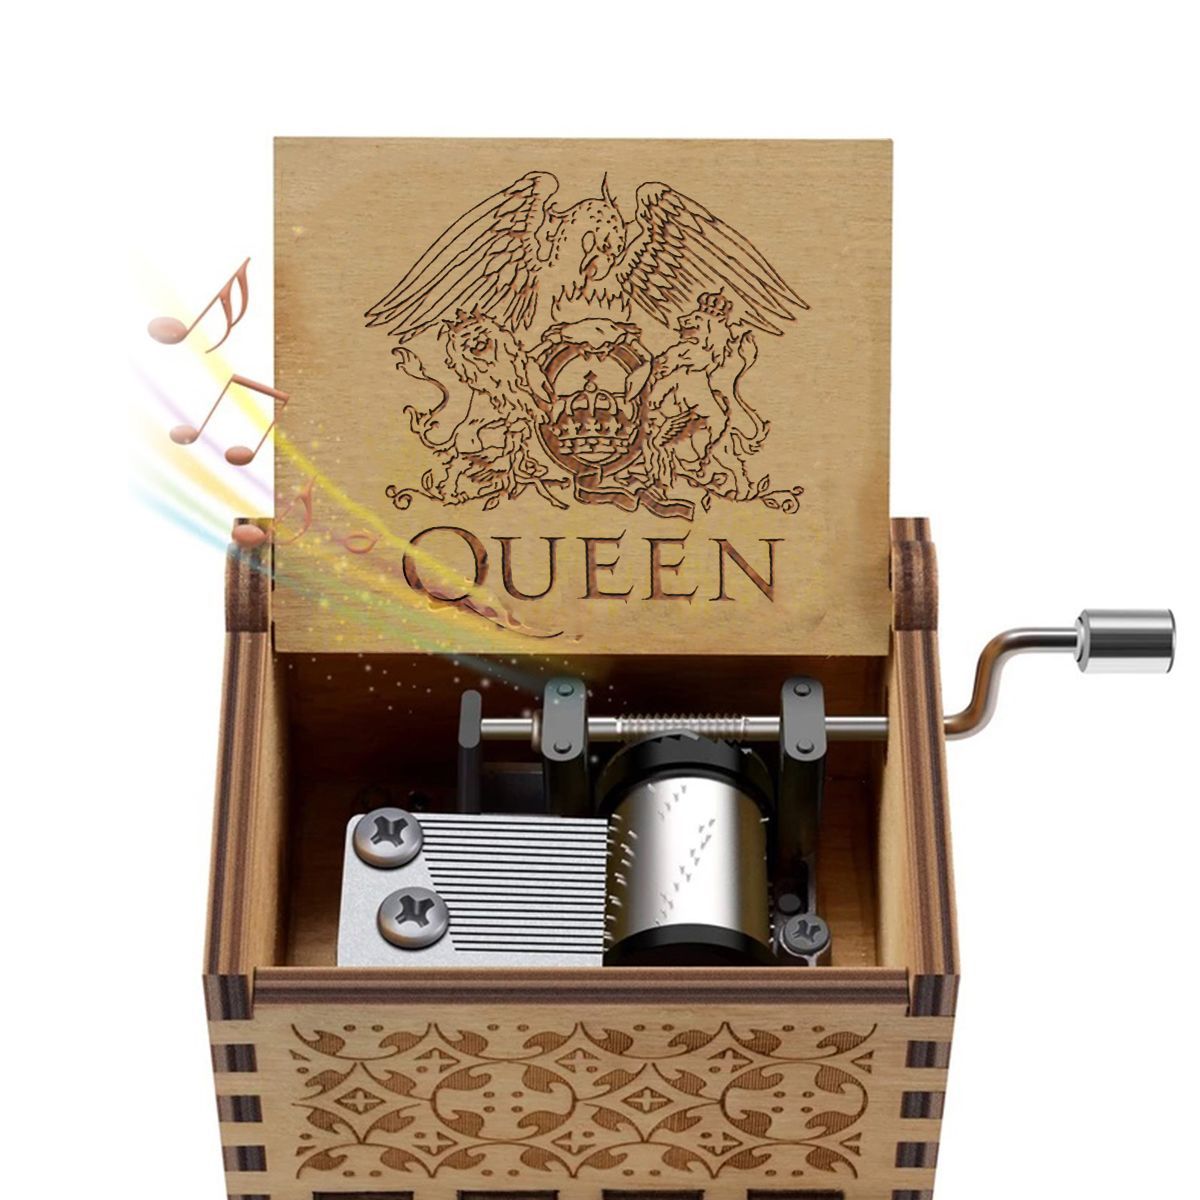 Hand-Crank-Wooden-Engraved-Queen-Music-Box-Kids-Christmas-Ornament-Gift-6452mm-1581260